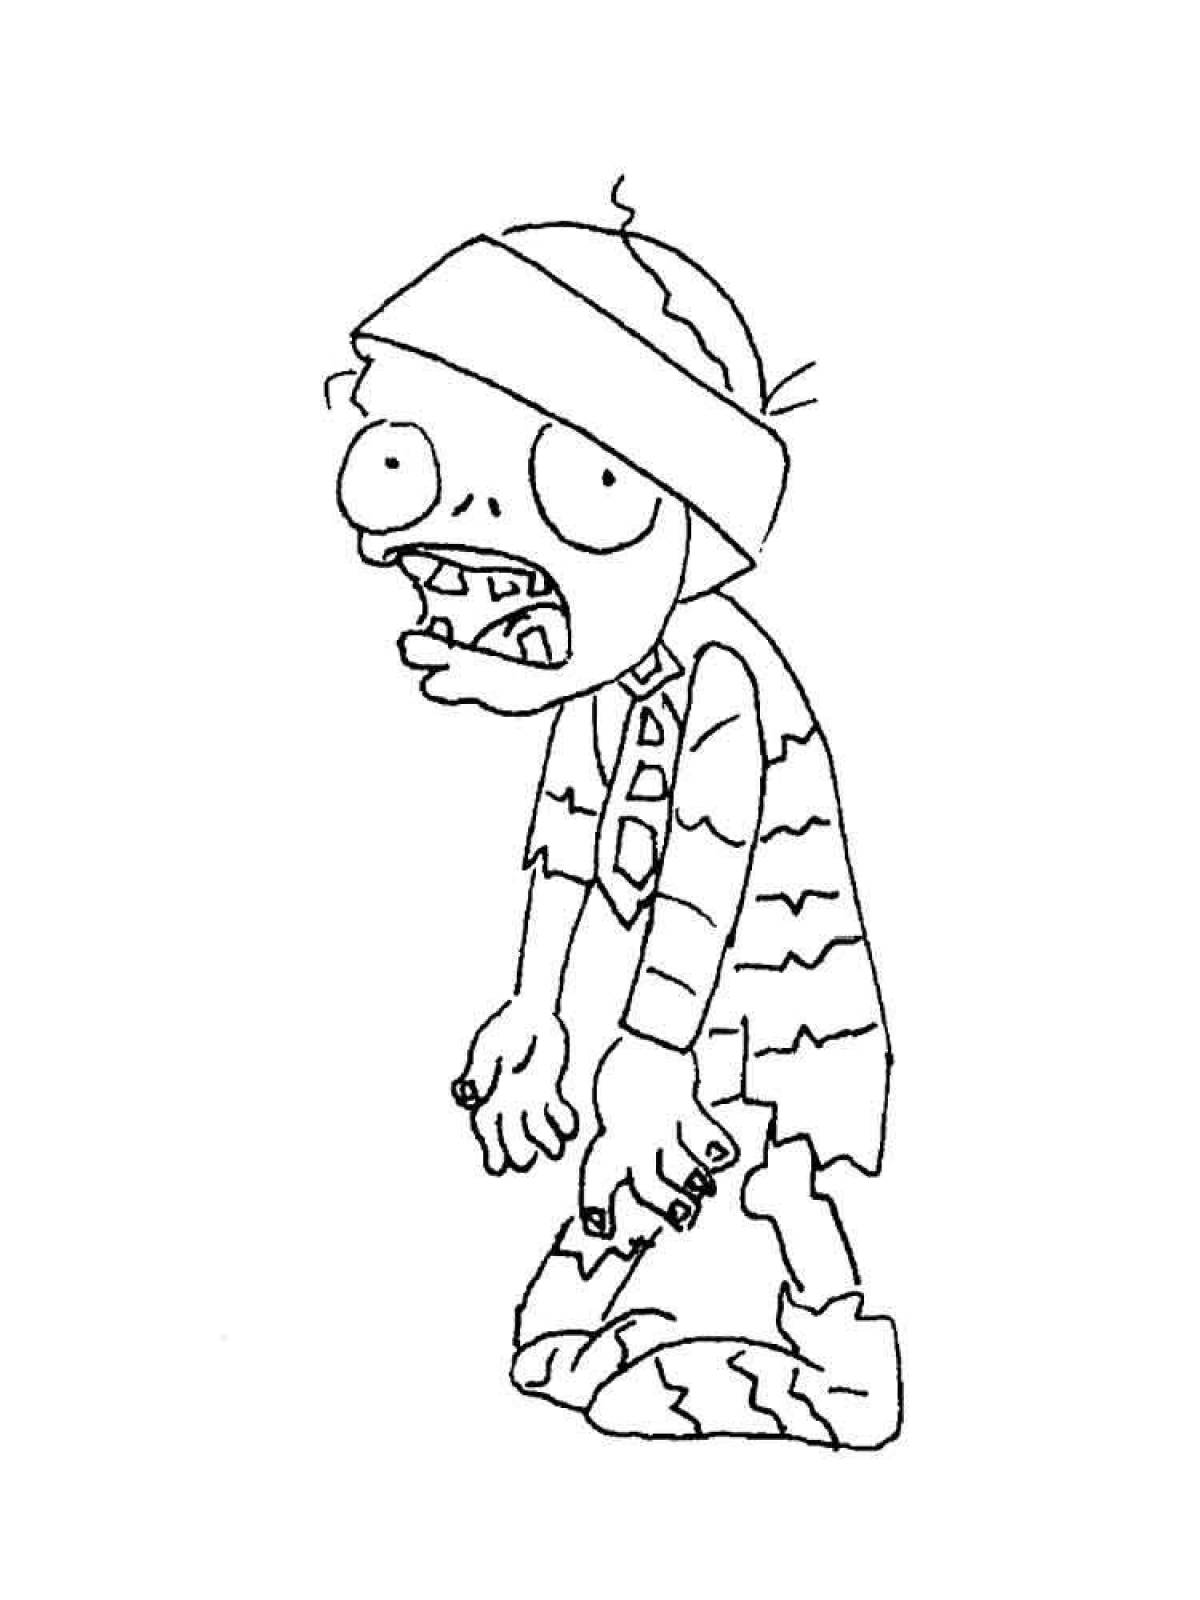 Chilling zombie coloring page